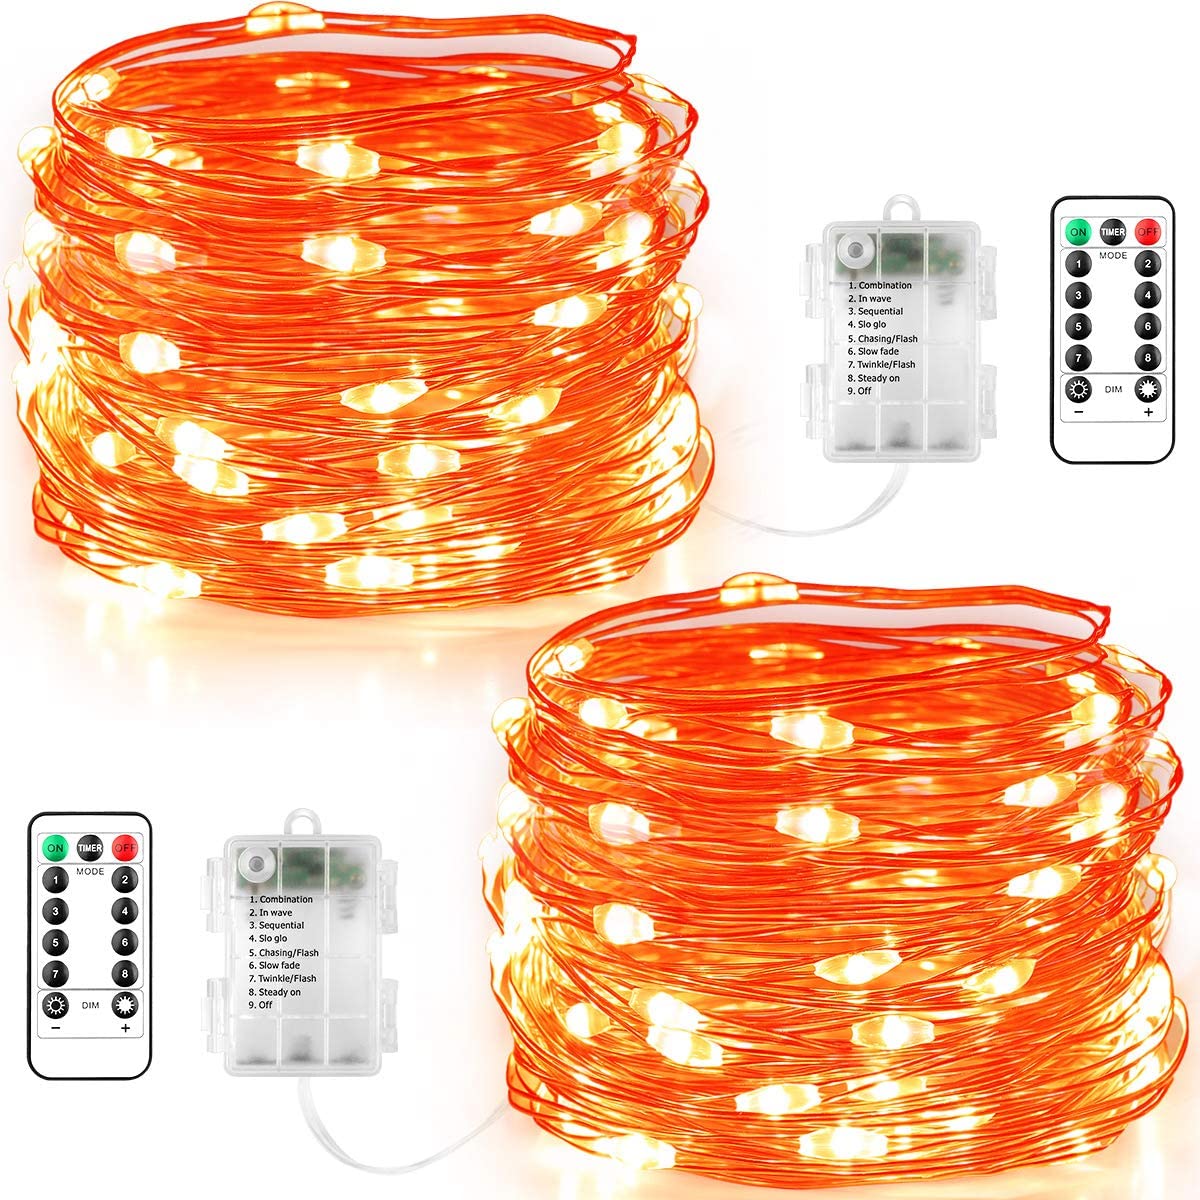 GDEALER 2 Pack Halloween Fairy Lights 20 FT 60 LEDs Orange lights Battery Operated with Remote Christmas Lights Waterproof Copper Wire Firefly Twinkle Lights Orange Halloween String Lights for Bedroom